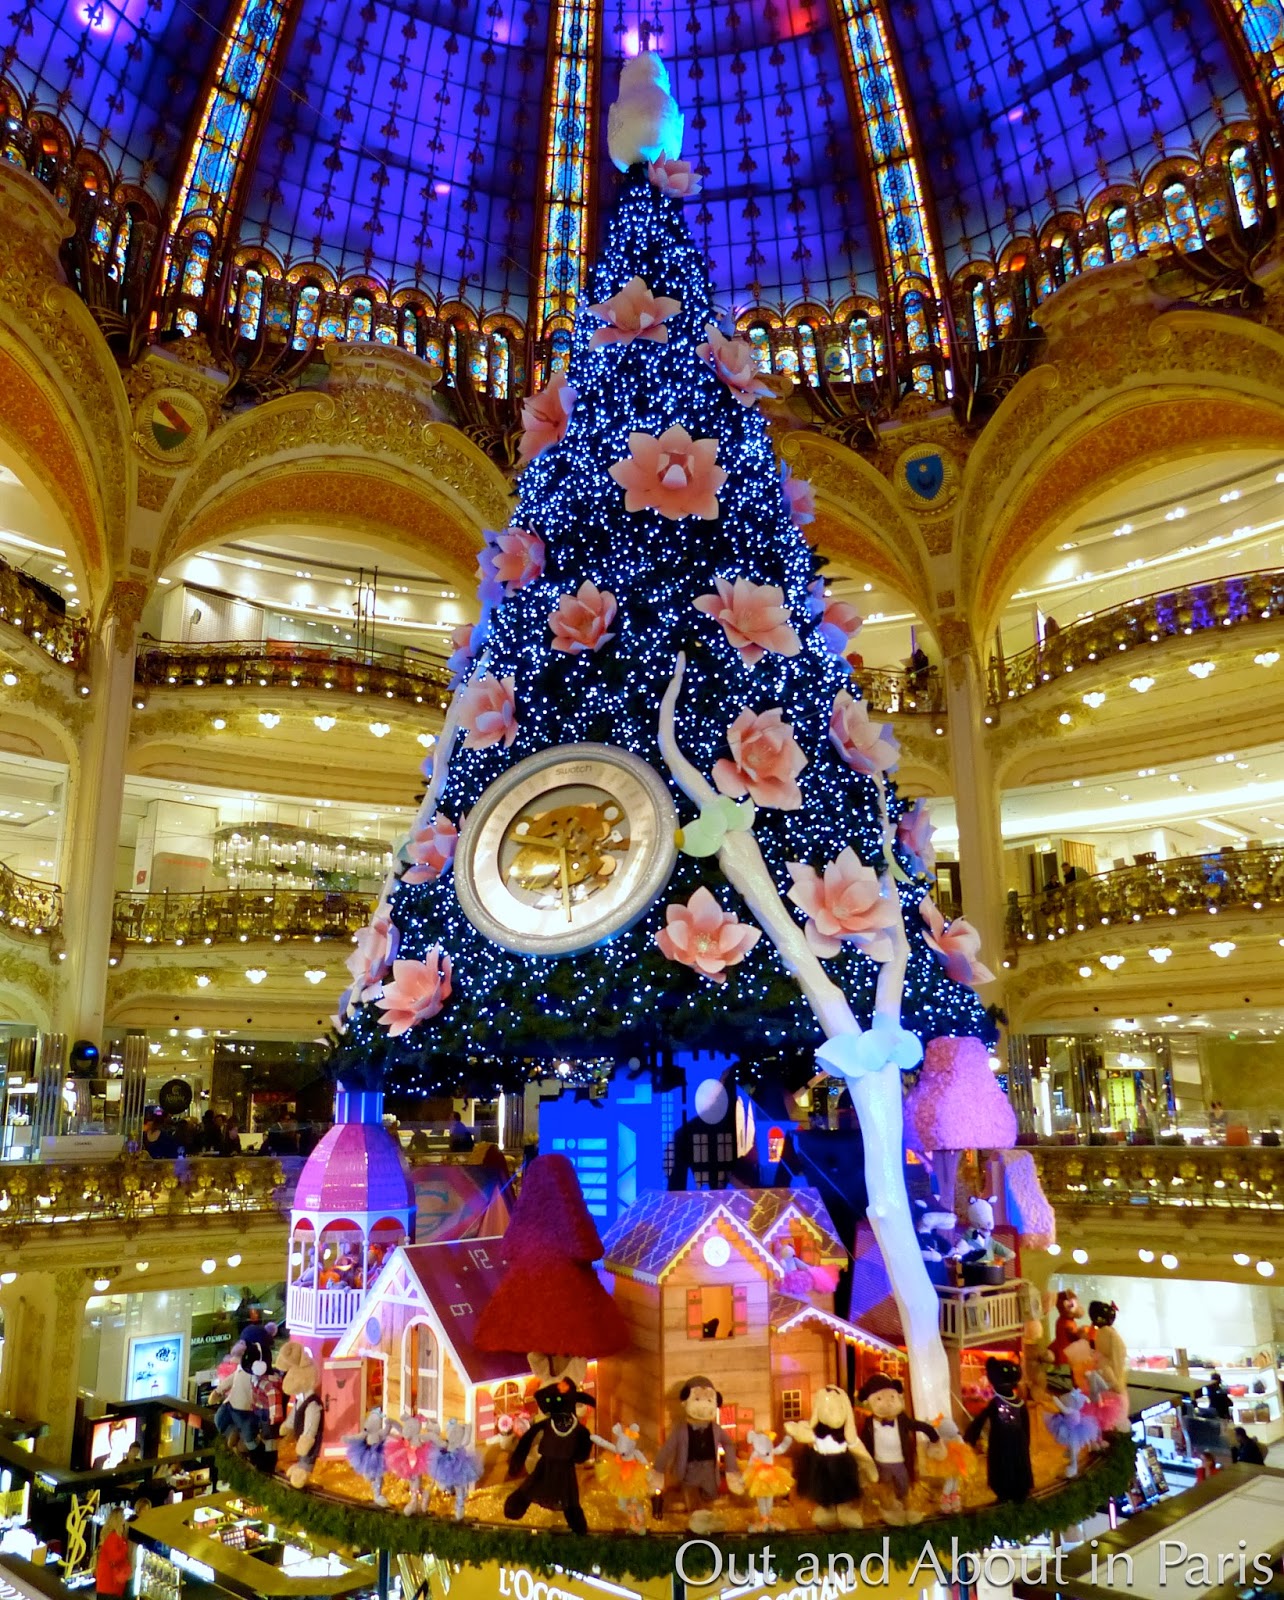 Tick-Tock  It's time for Christmas! Léa Seydoux and André Dussollier  unveil animated Christmas windows at Galeries Lafayette